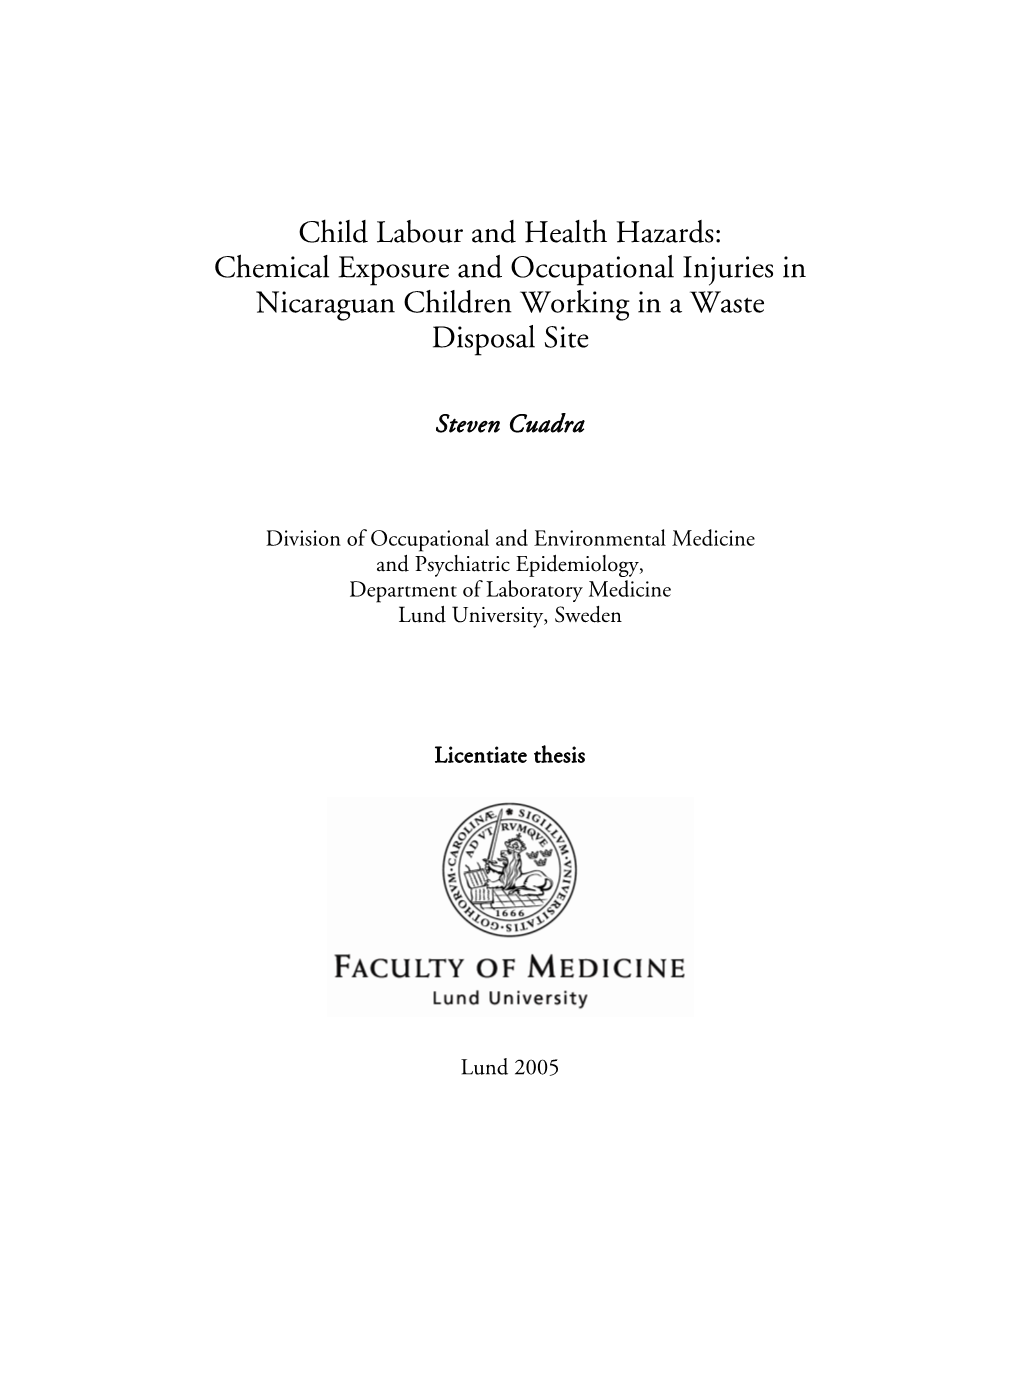 Child Labour and Health Hazards: Chemical Exposure and Occupational Injuries in Nicaraguan Children Working in a Waste Disposal Site